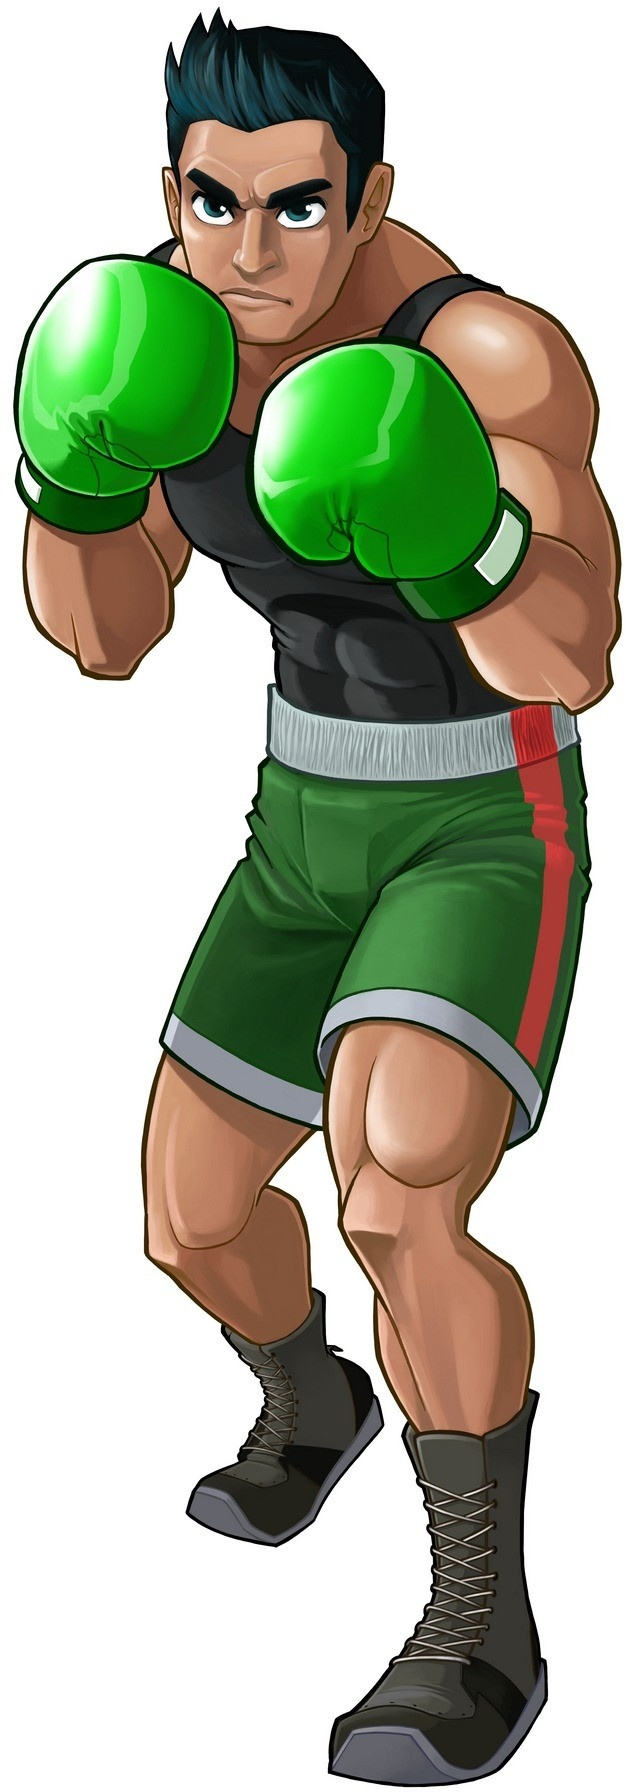 File Little Mac Punch Out Wii Png Smashwiki The Super Smash Bros Wiki